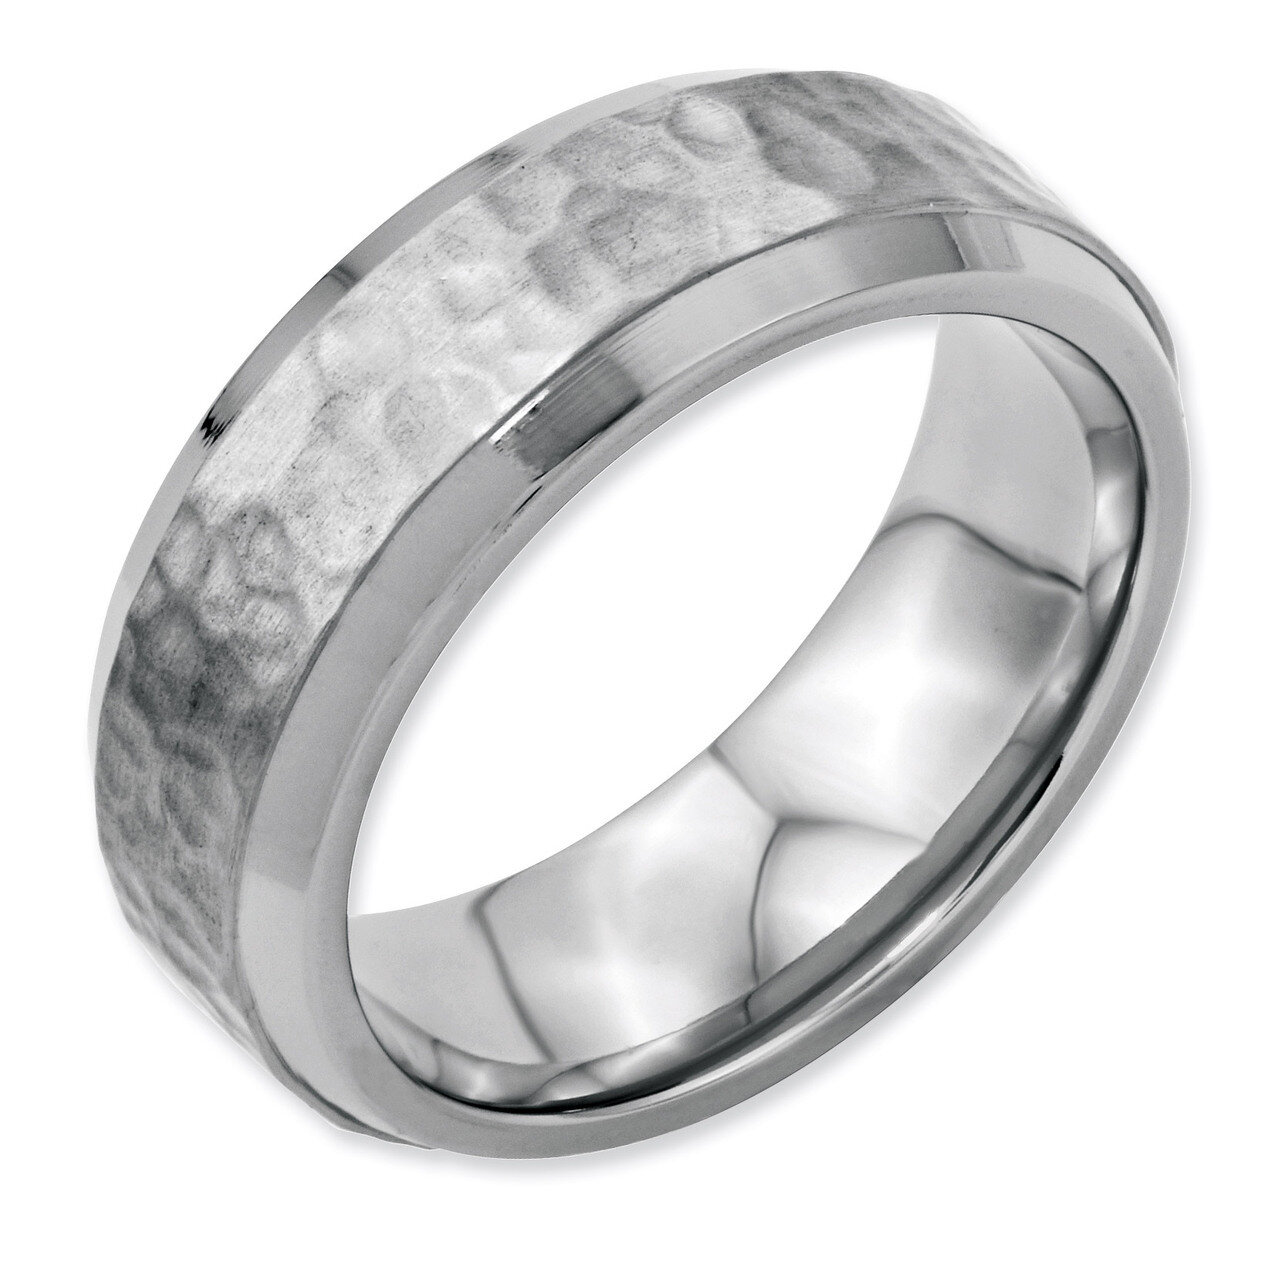 Beveled Edge 8mm Hammered and Polished Band - Stainless Steel SR117